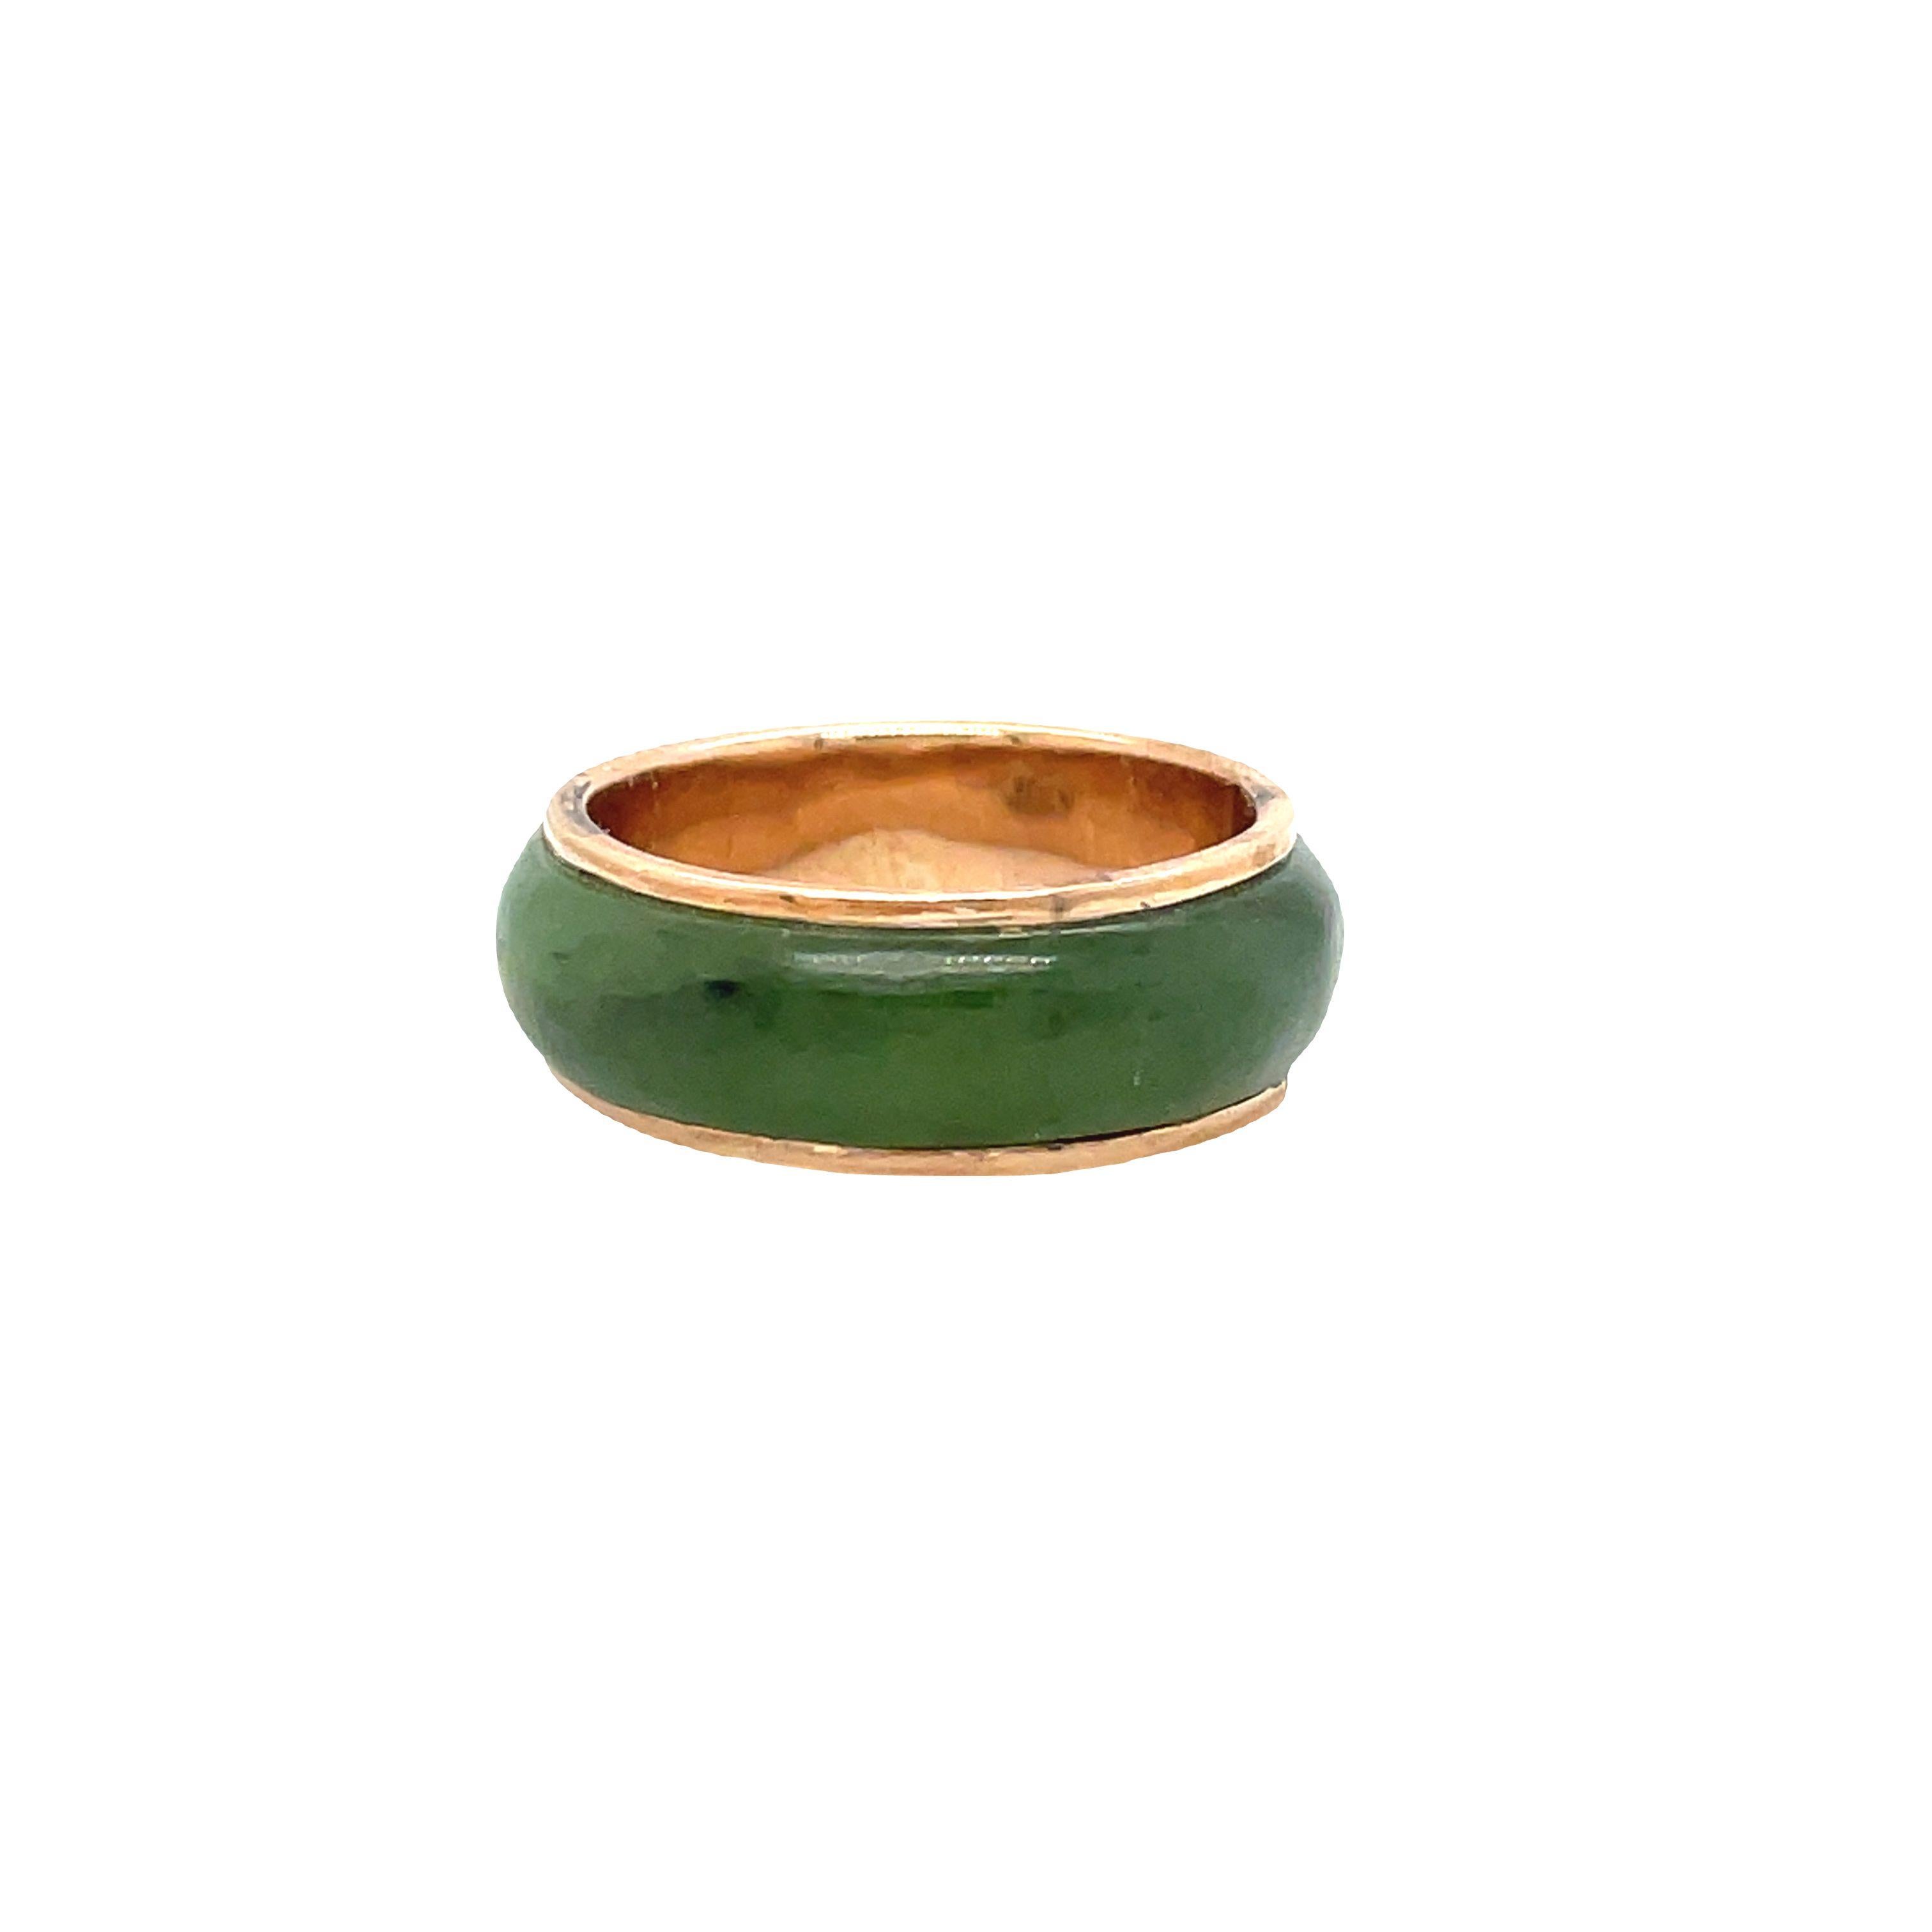 This beautiful ring is made of 14K rose gold and features natural jade gemstones that encircle the entire band. The jade stones are perfectly carved and create a symmetrical design that adds elegance to the ring. The edges of the ring are